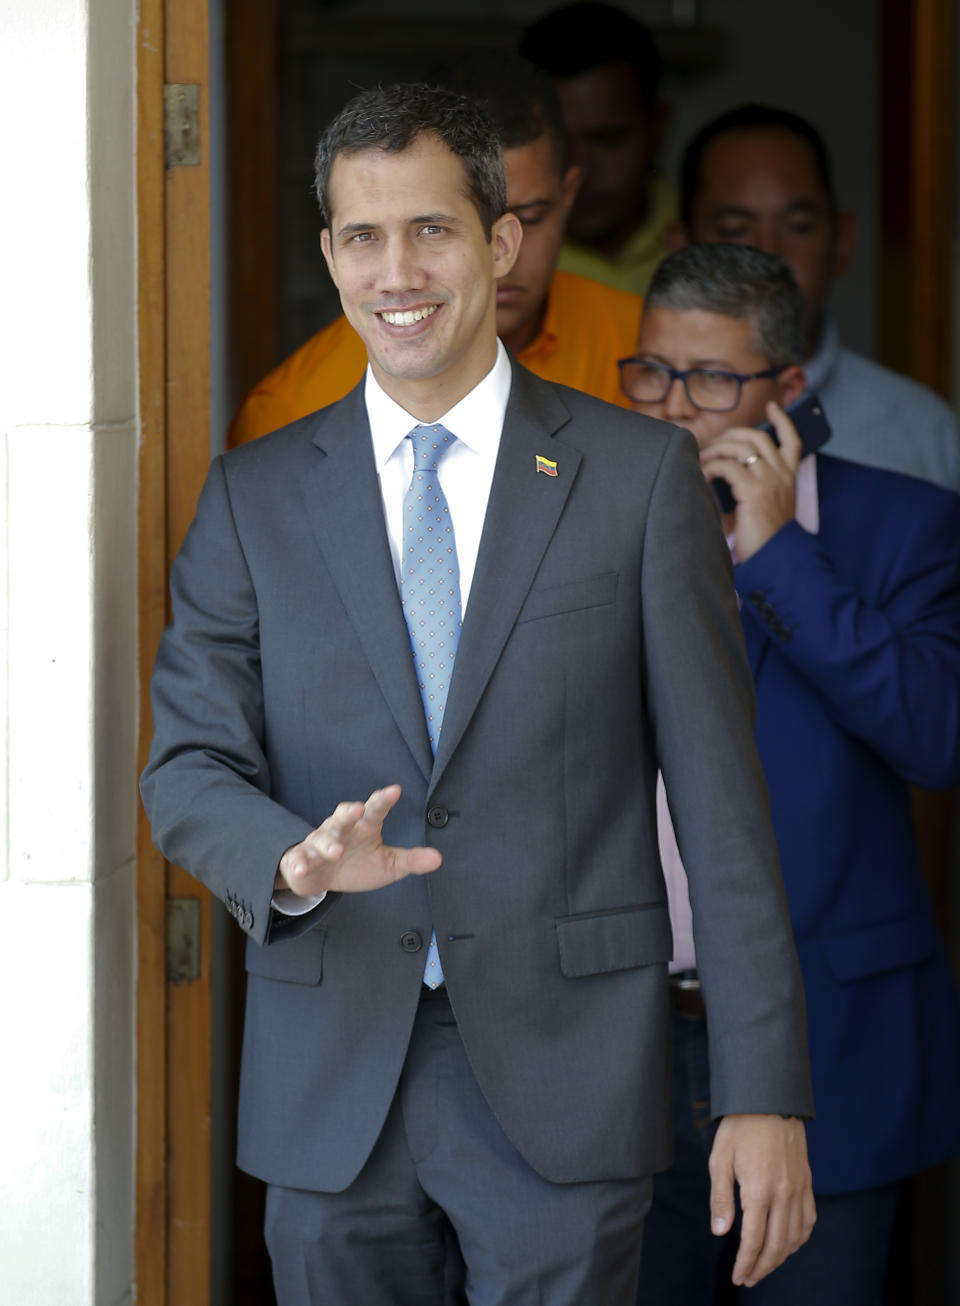 National Assembly President Juan Guaido, who declared himself interim president of Venezuela, arrives to lead a session of the opposition-controlled assembly in Caracas, Venezuela, Monday, March 11, 2019. An explosion rocked a power station Monday in the Venezuelan capital, witnesses said, adding to the crisis created by days of nationwide power cuts, while Guaido has blamed the blackouts that began Thursday on alleged government corruption and mismanagement. (AP Photo/Eduardo Verdugo)